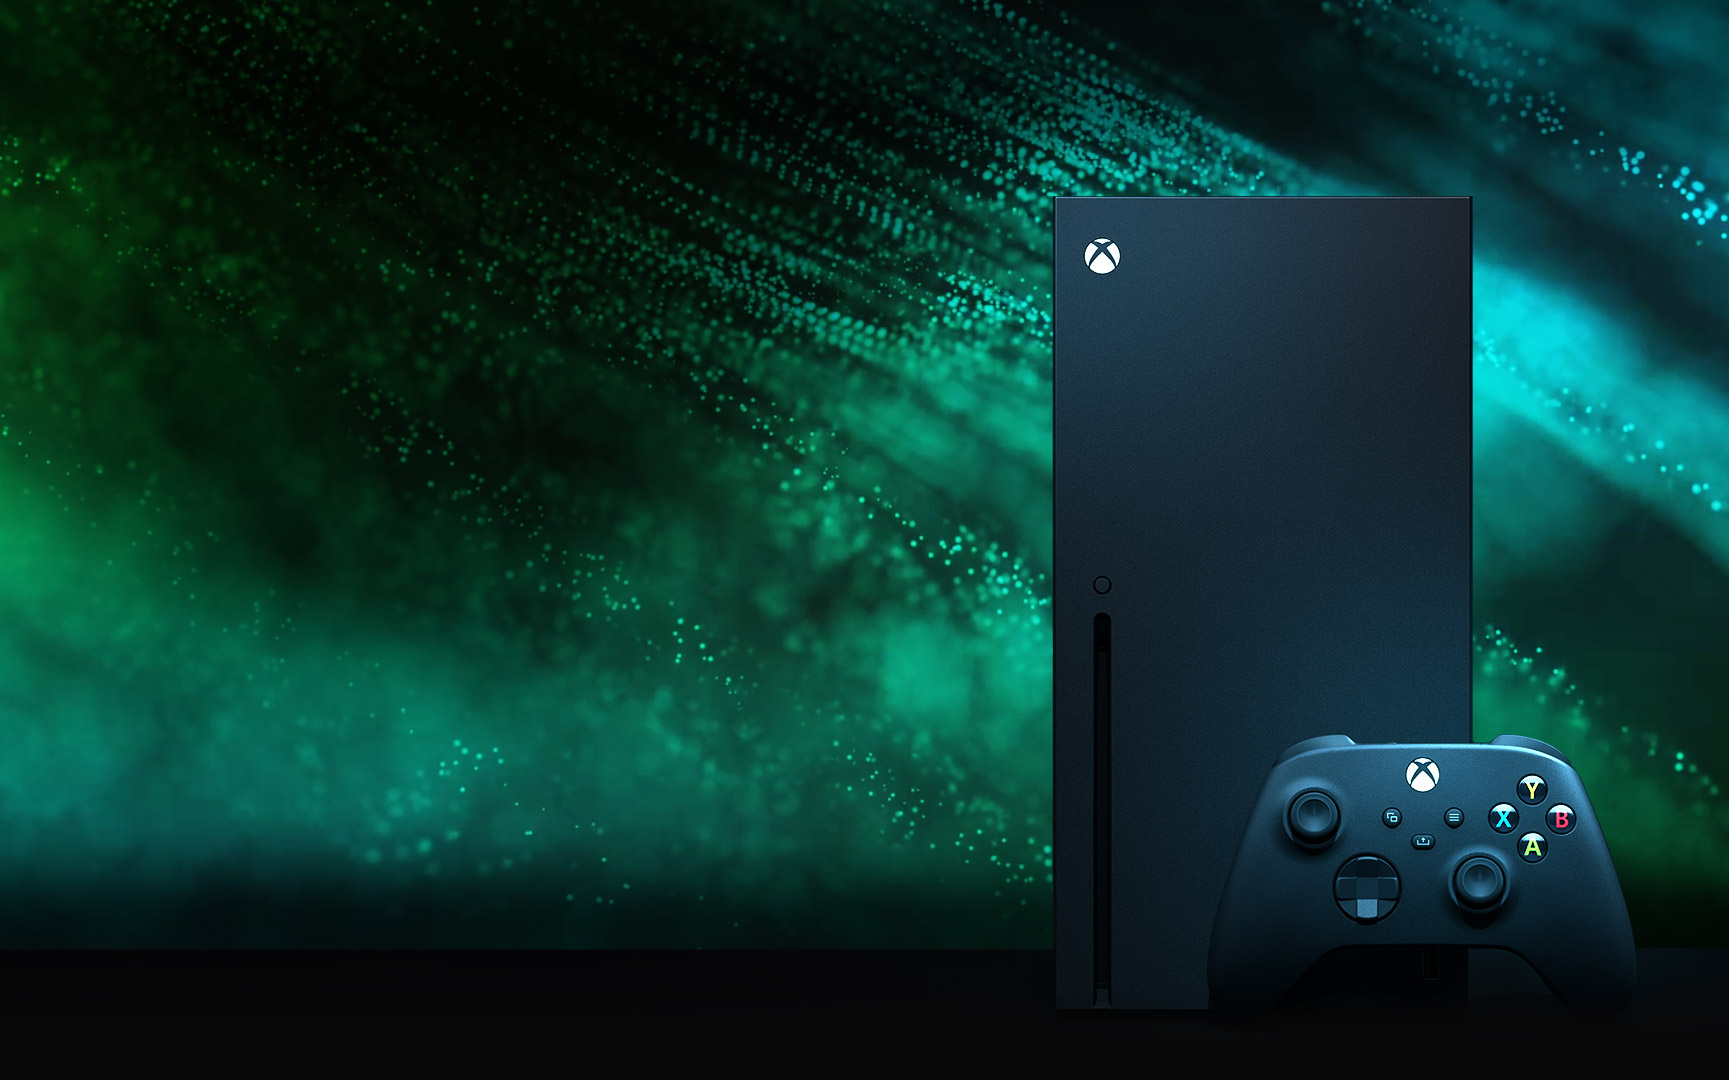 Xbox Series X console with Xbox controller. Animated background of characters from Starfield, Redfall, and Diablo IV.